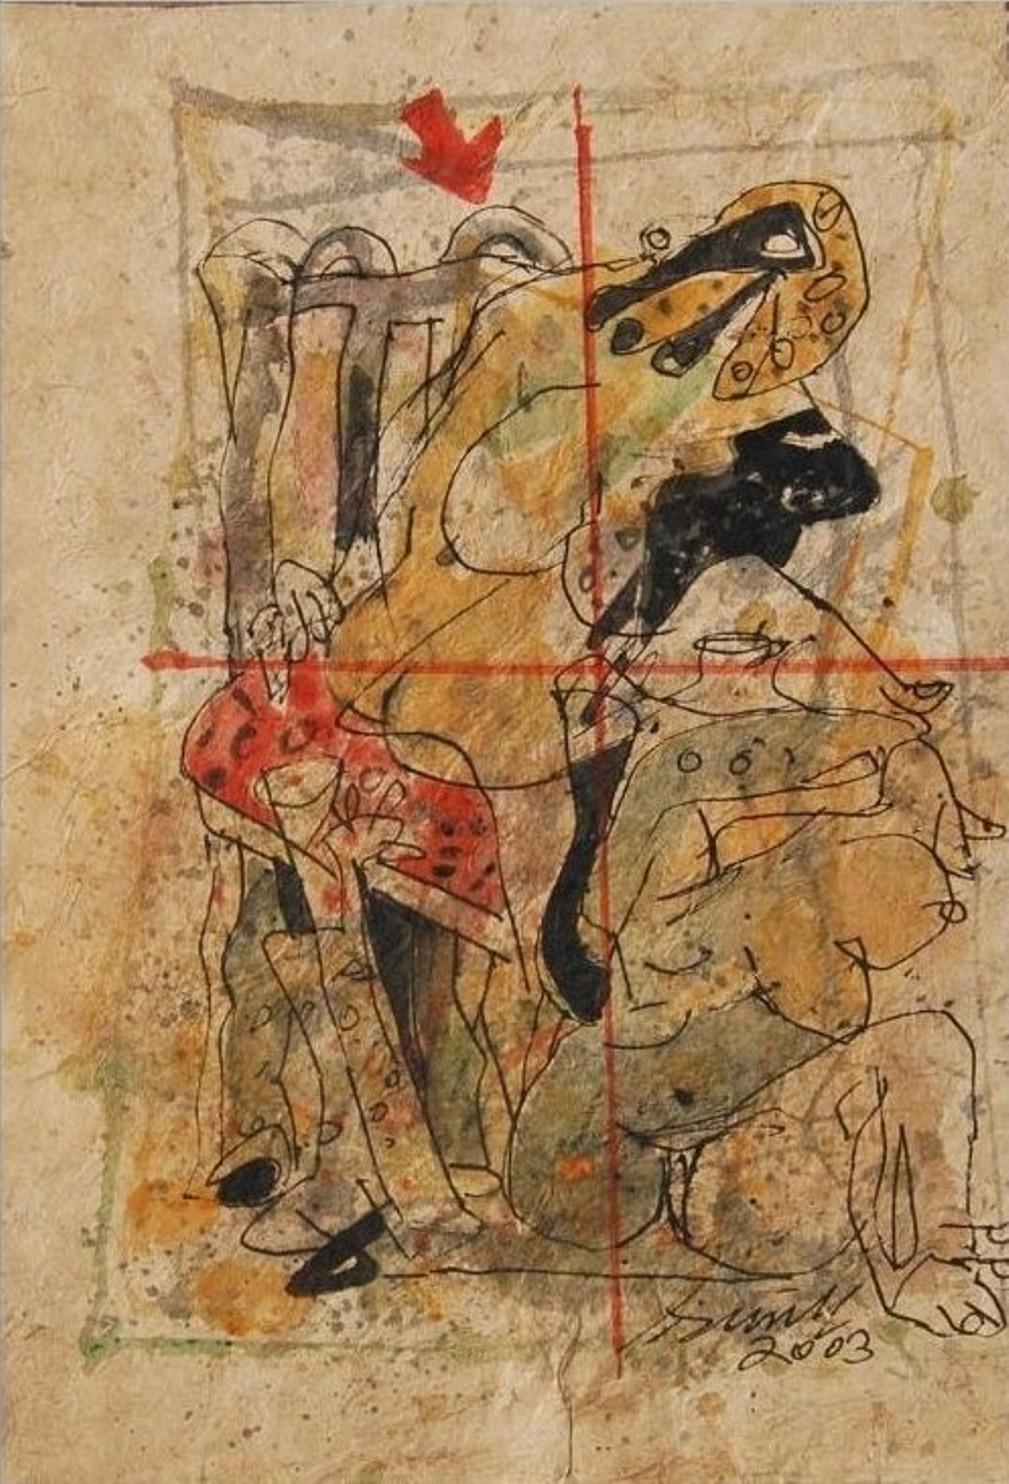 Sunil Das - Color Based Drawings, 
13 x 9.5 inches ( Unframed sizes )
Acrylic, Watercolour, Pen &Ink on Handmade Paper, 2003
( Unframed & Delivered )

Sunil Das (1939-2015) was a Master Modern Indian Artist from Bengal. Extremely successful right